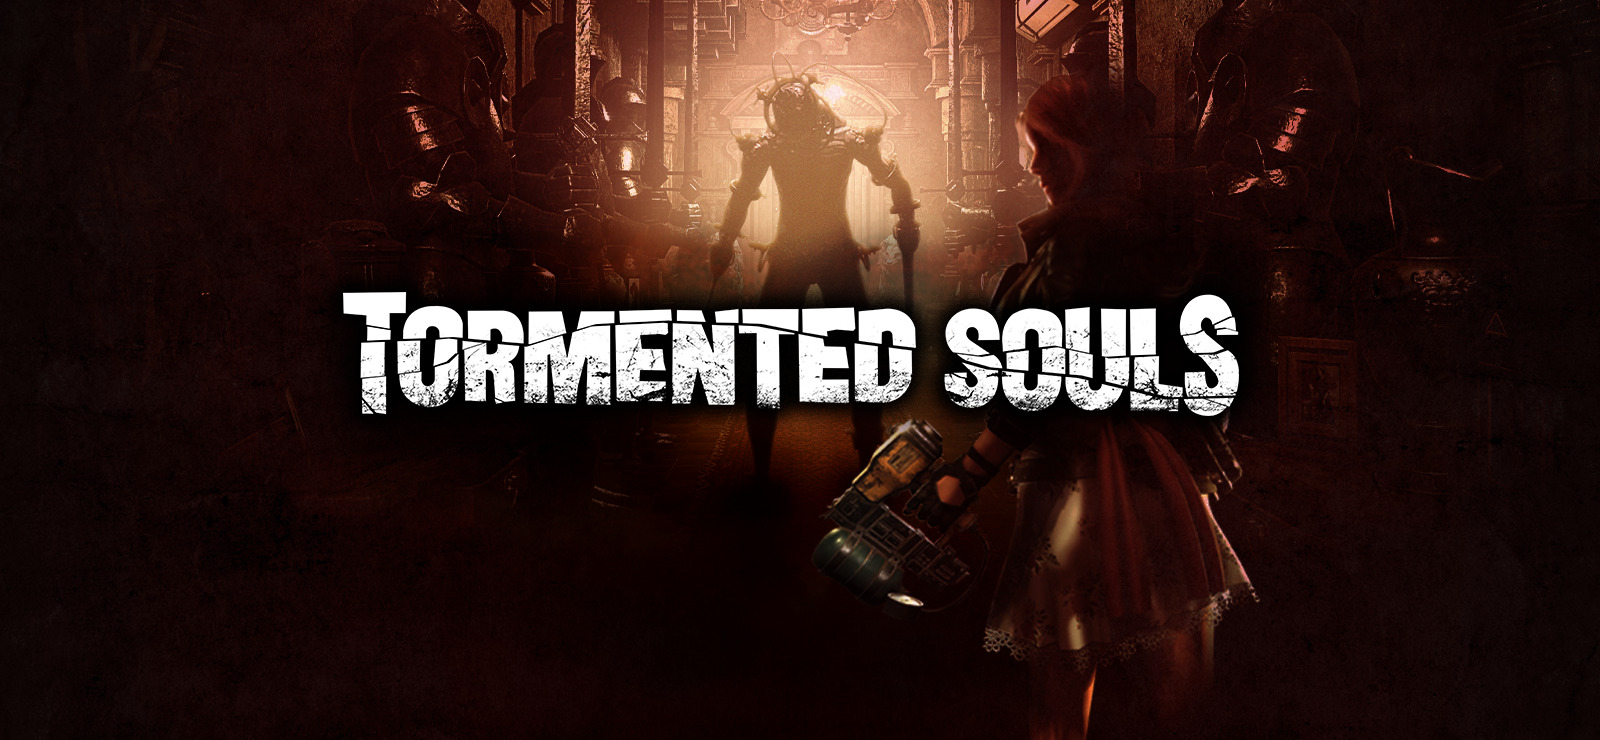 Tormented Souls 2 on Steam